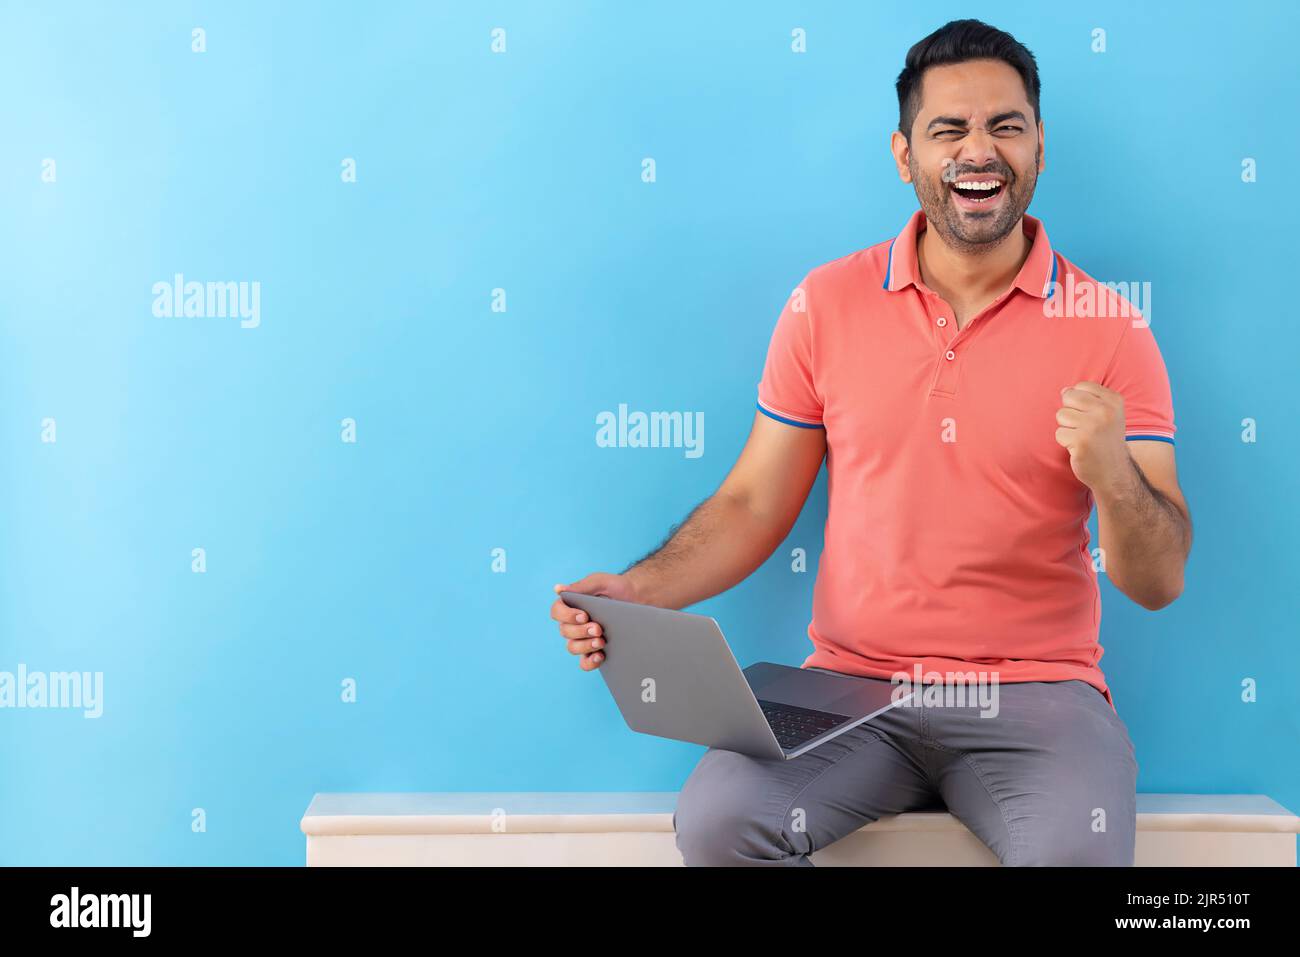 Happy young man cheering by raising fist while using laptop Stock Photo